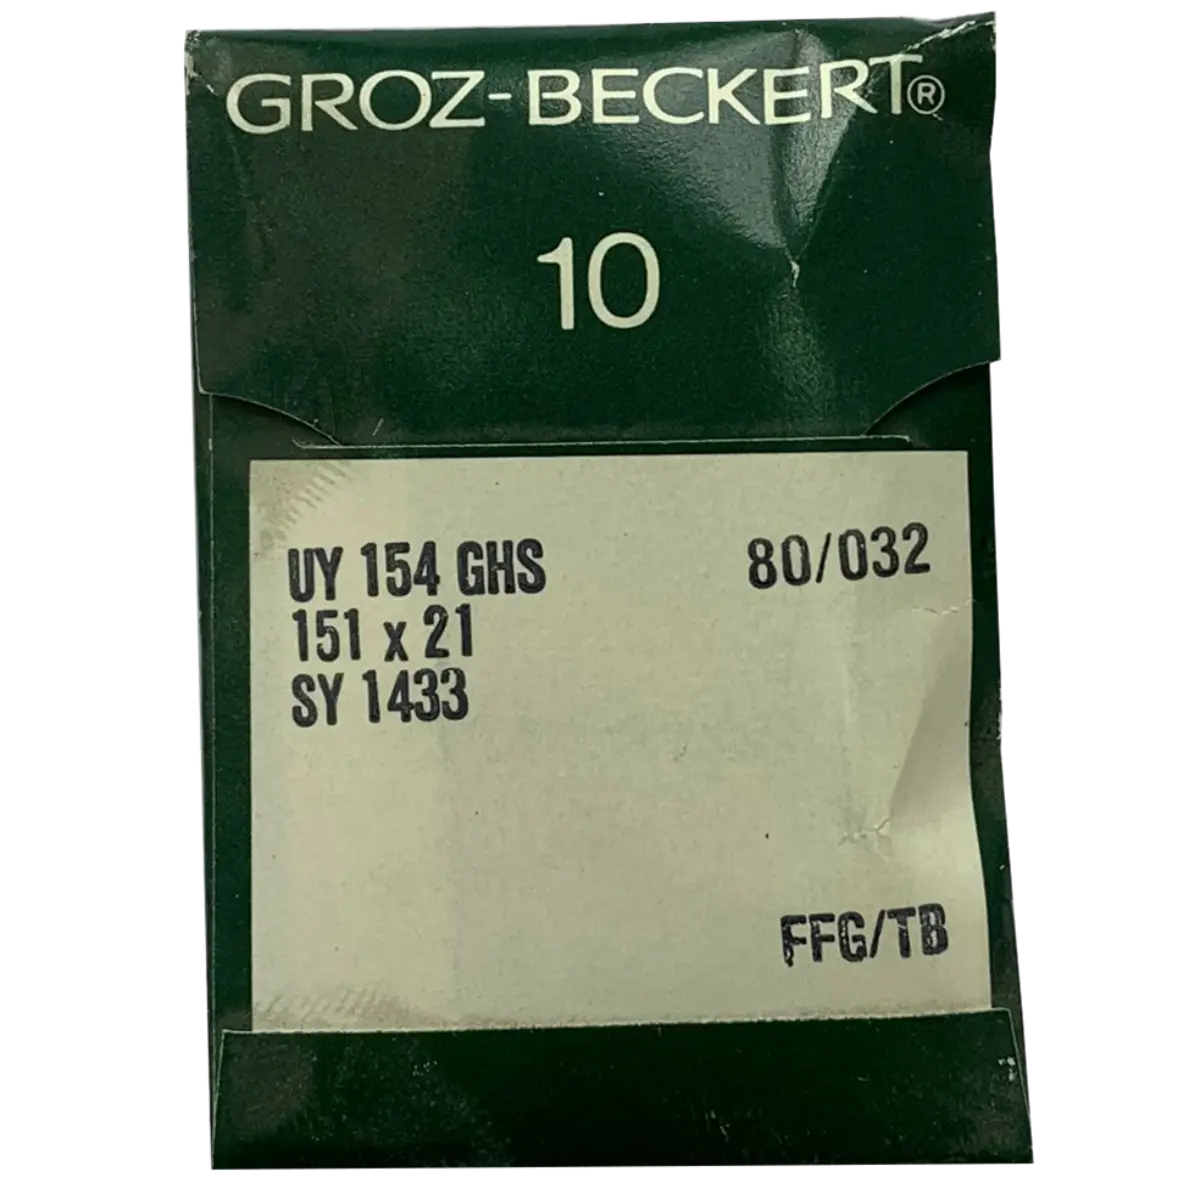 Groz-Beckert Industrial Needles UY 154 GAS, UY154 FGS, UY154 GHS, SY 1431, 151x21, Canu 06:60